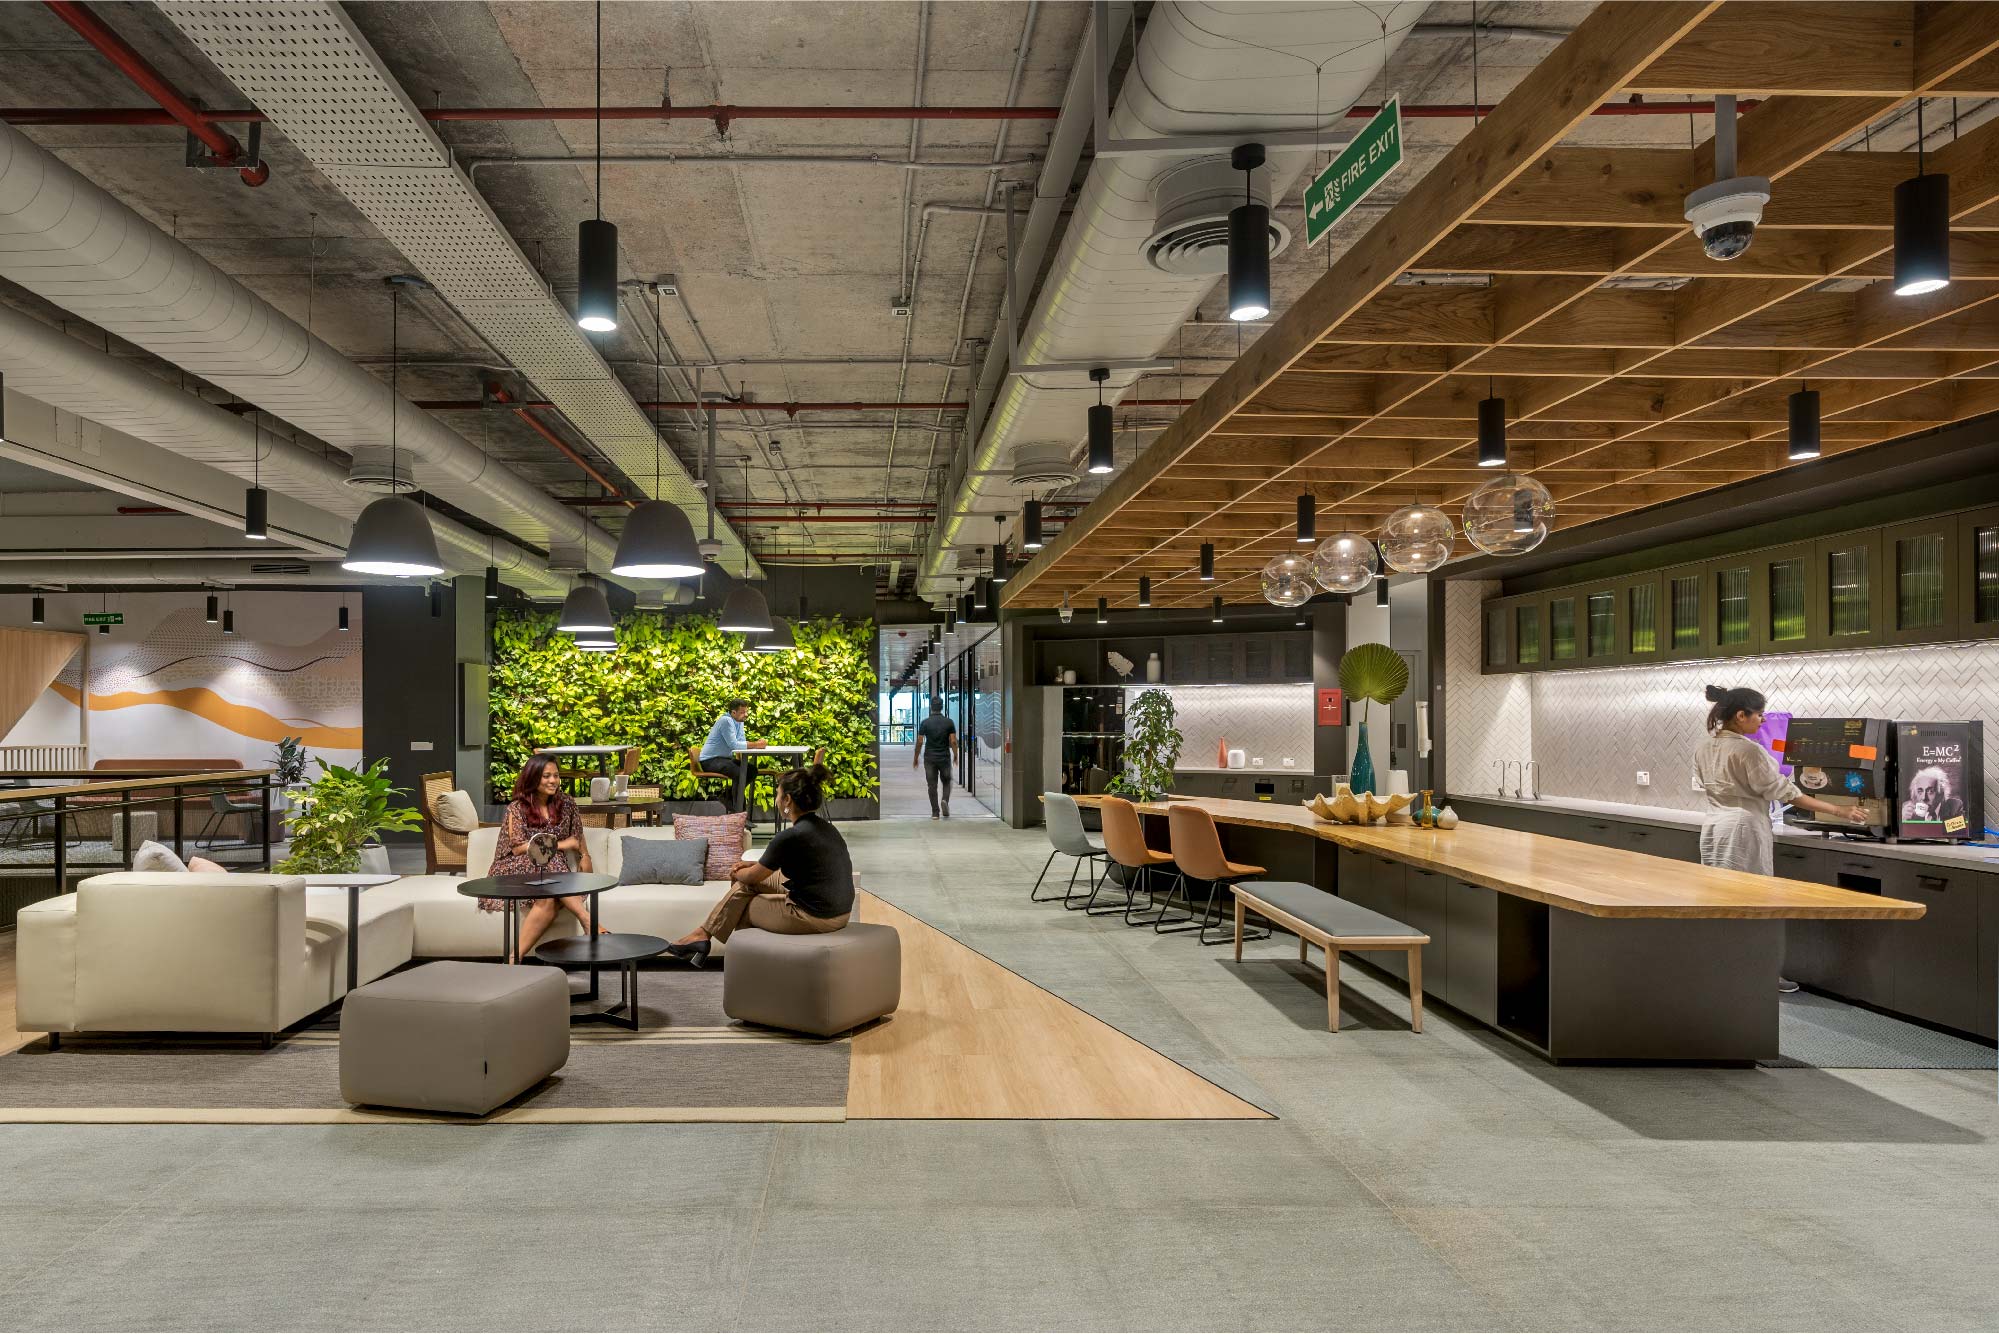 Legato modern office interior design with spaces for its employees to work and collaborate 